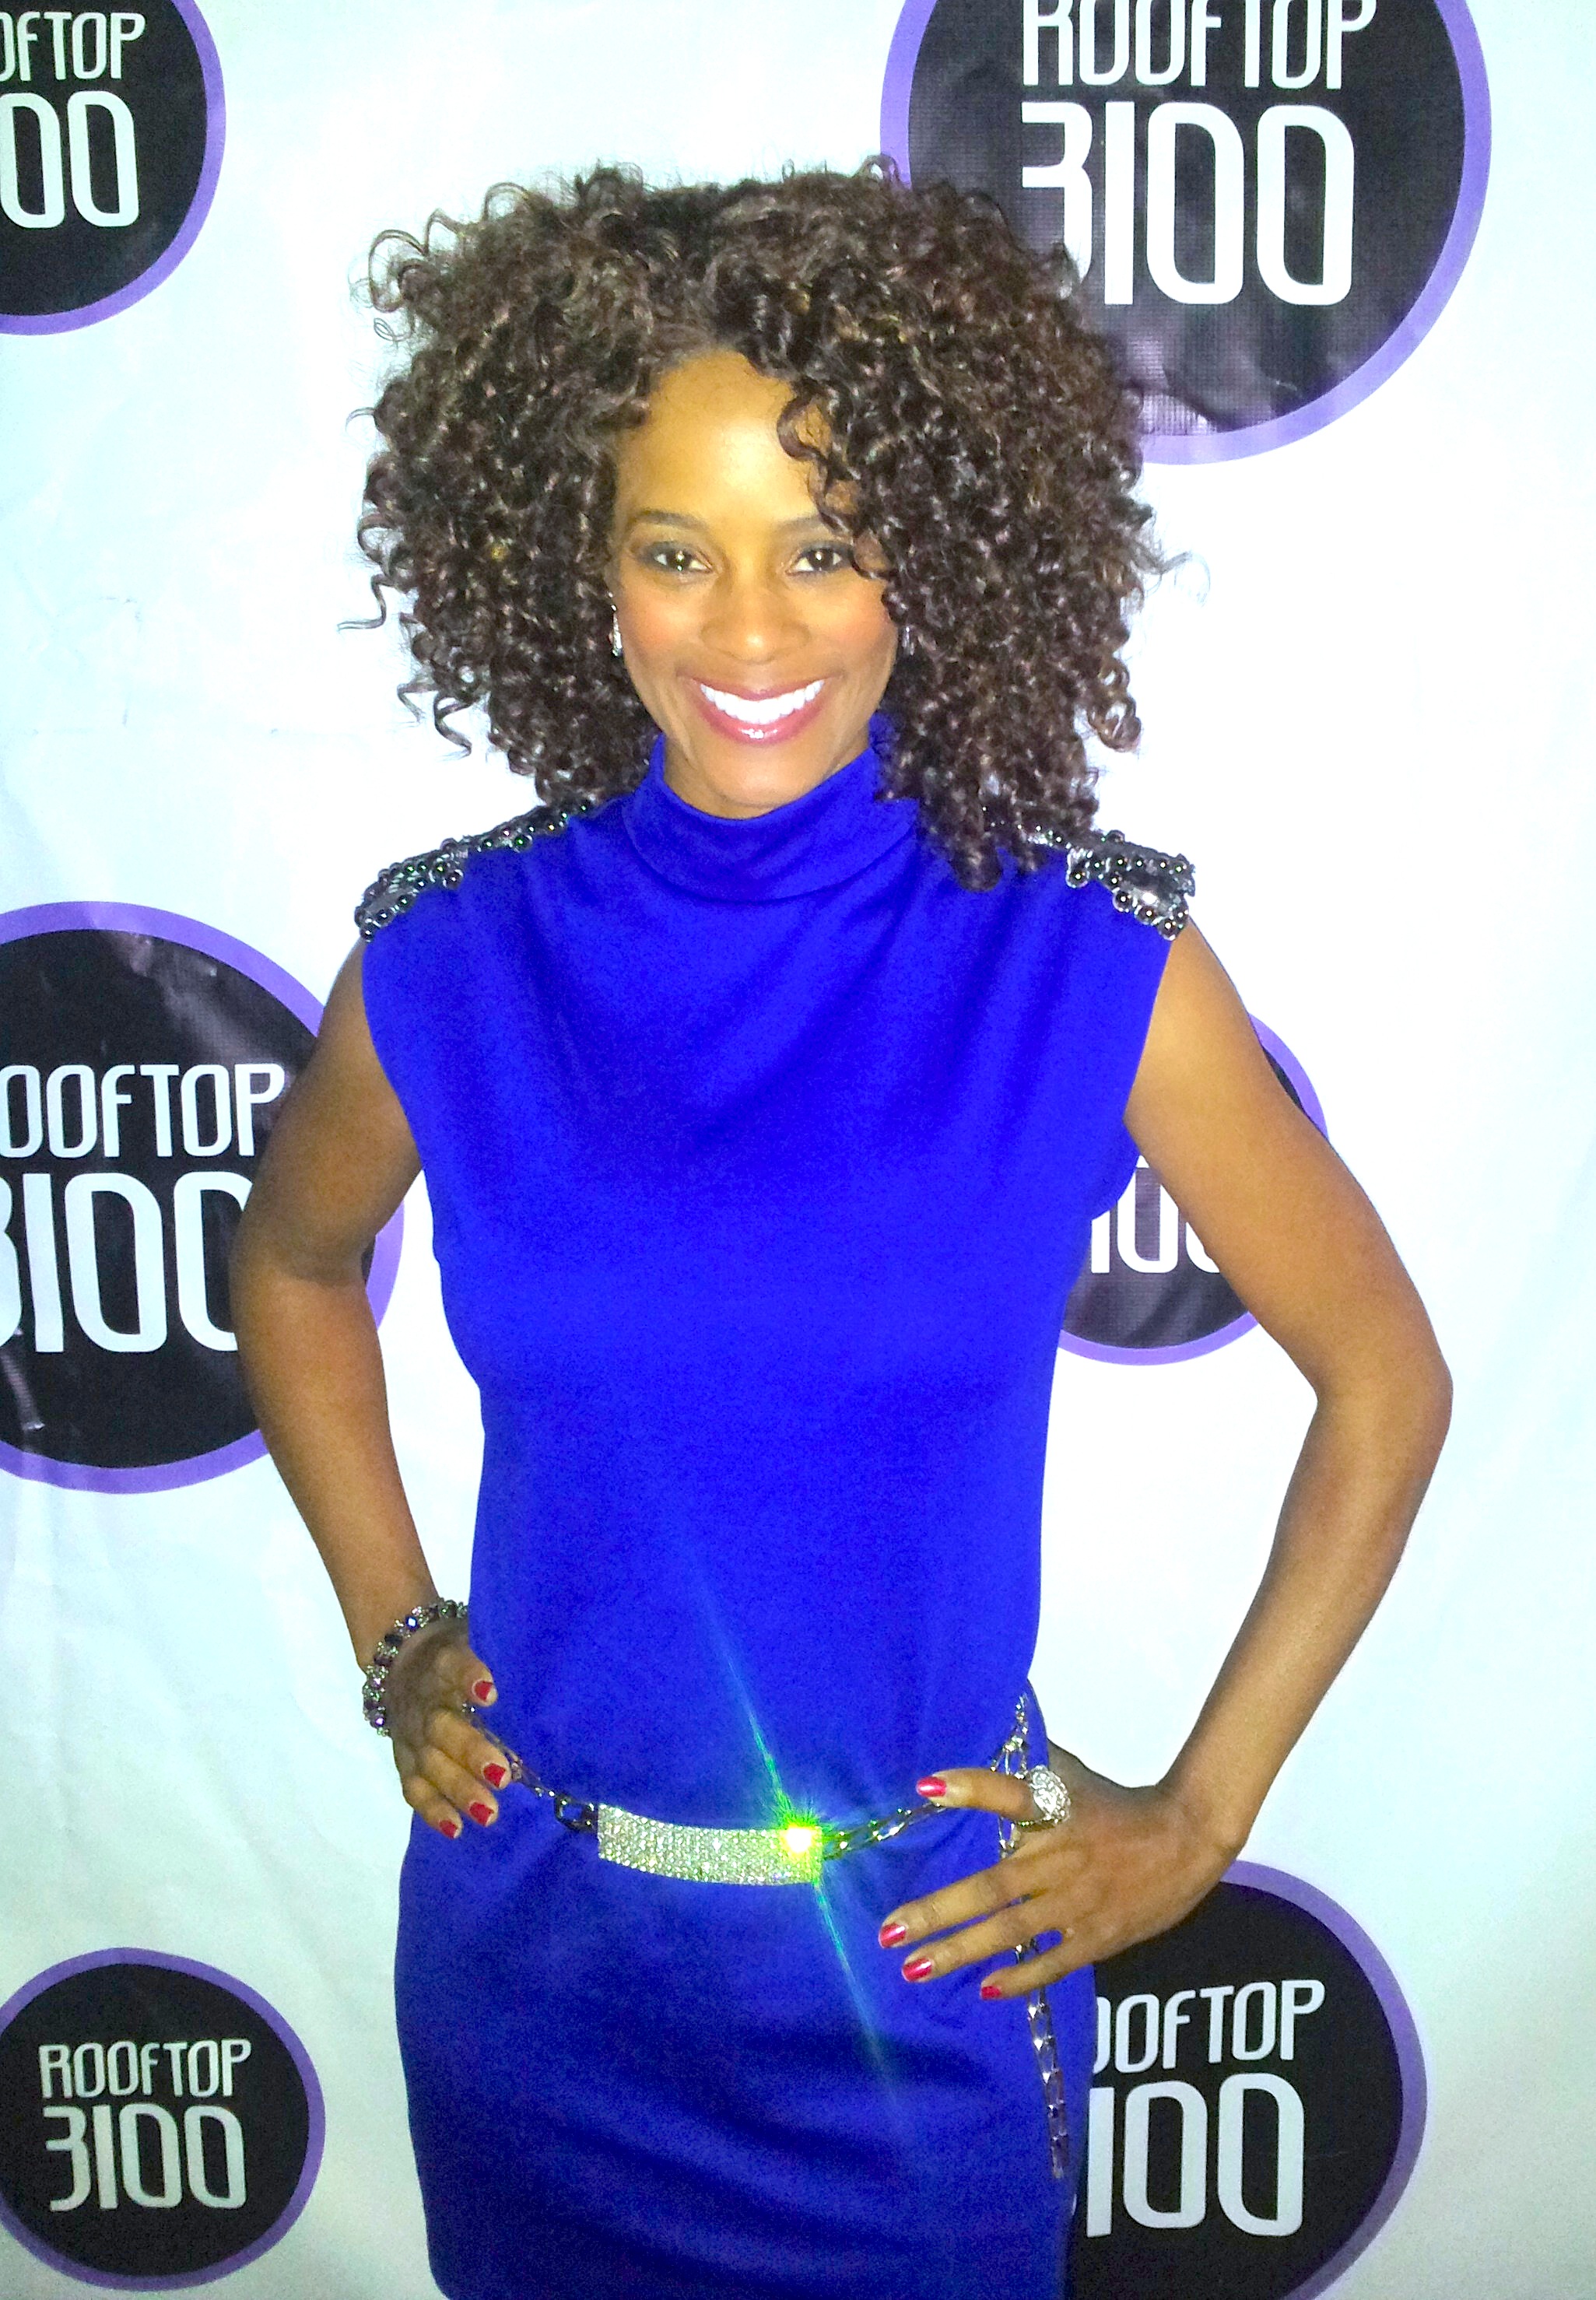 Host #GermanyKent arriving at Rooftop3100 Annual Toy Drive